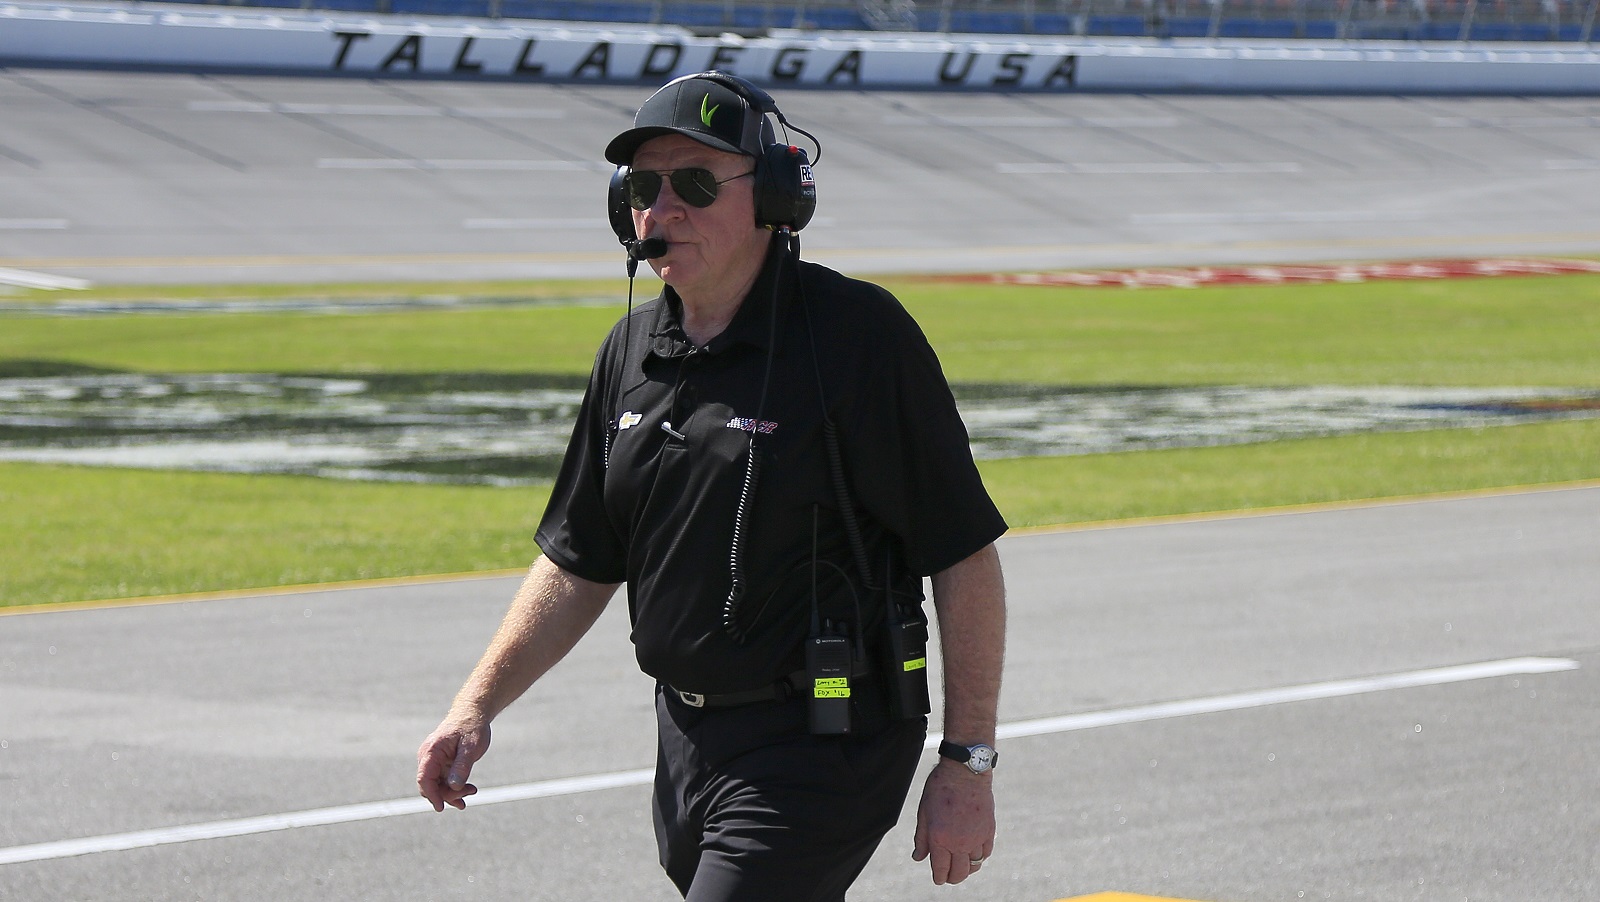 Crew chief of the No, 3 Chevy Larry McReynolds makes his way to his pit box before the Ag-Pro 300 NASCAR Xfinity Series race on April 23, 2022, at Talladega Superspeedway.